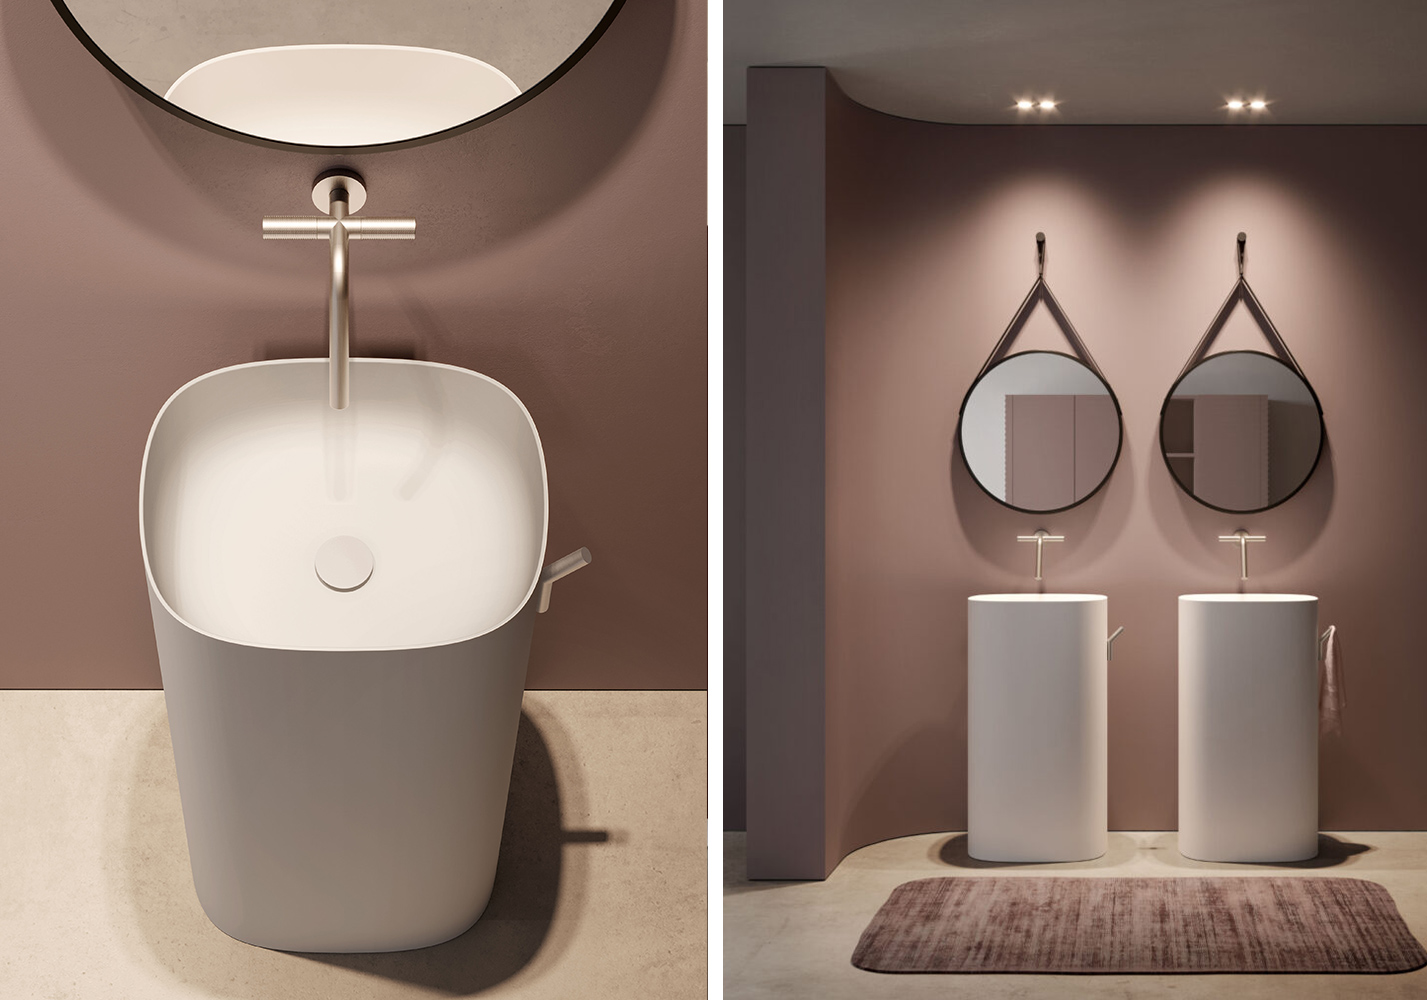 Colours and sculptural elegance modern for surfaces - bathroom Ideagroup a of textured